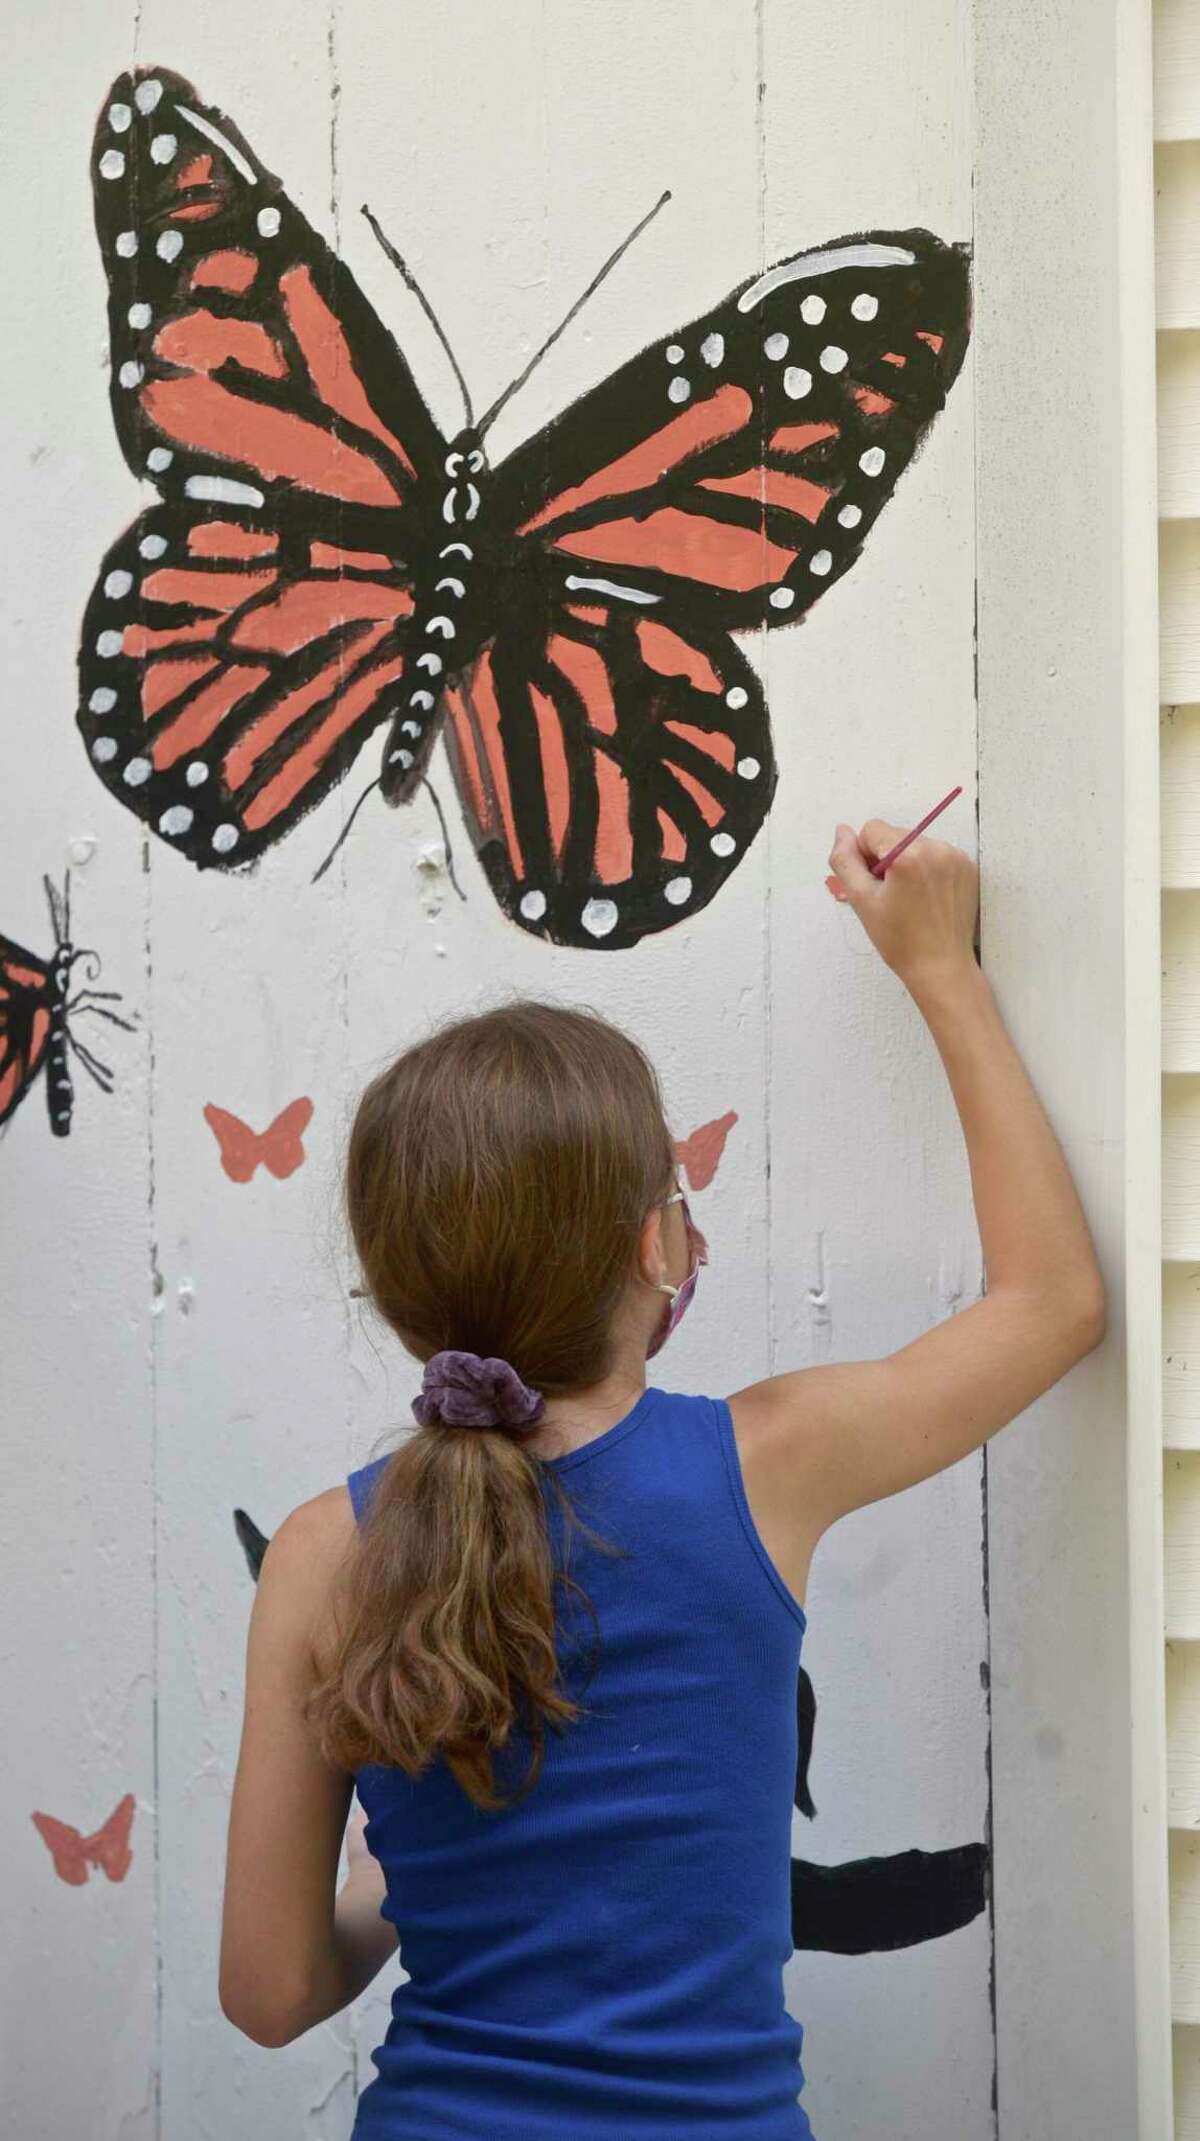 Students in the Ridgefield Guild of Artists’ Summer Arts Program studied species of pollinators that live in the gardens in front the guild and have created murals on the inside and outside of the building. Friday, August 13, 2021; Ridgefield, Conn.